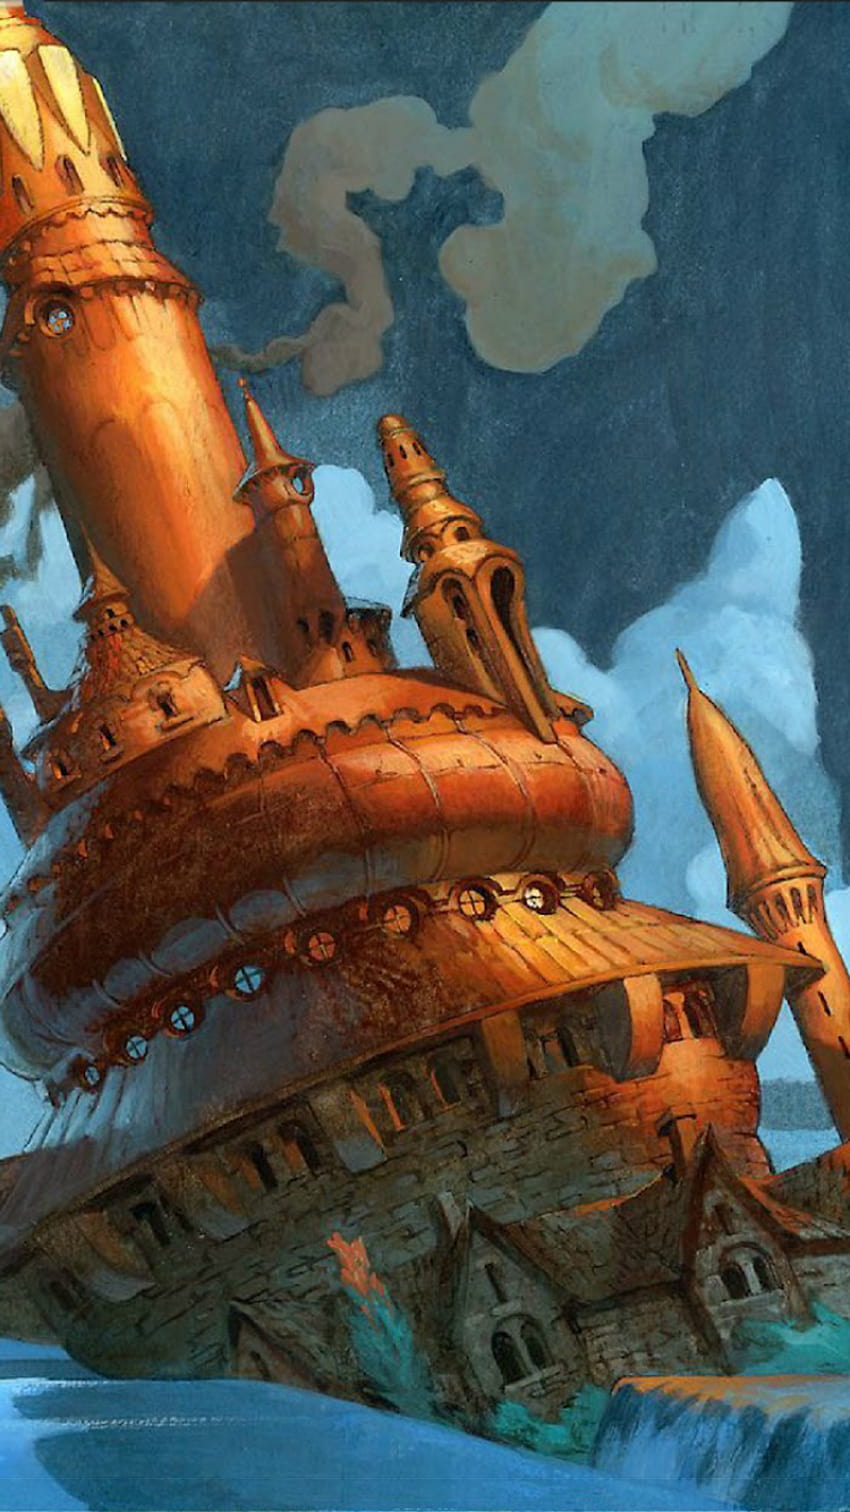 Reliquary Tower from my favorite game, mtg iphone HD phone wallpaper